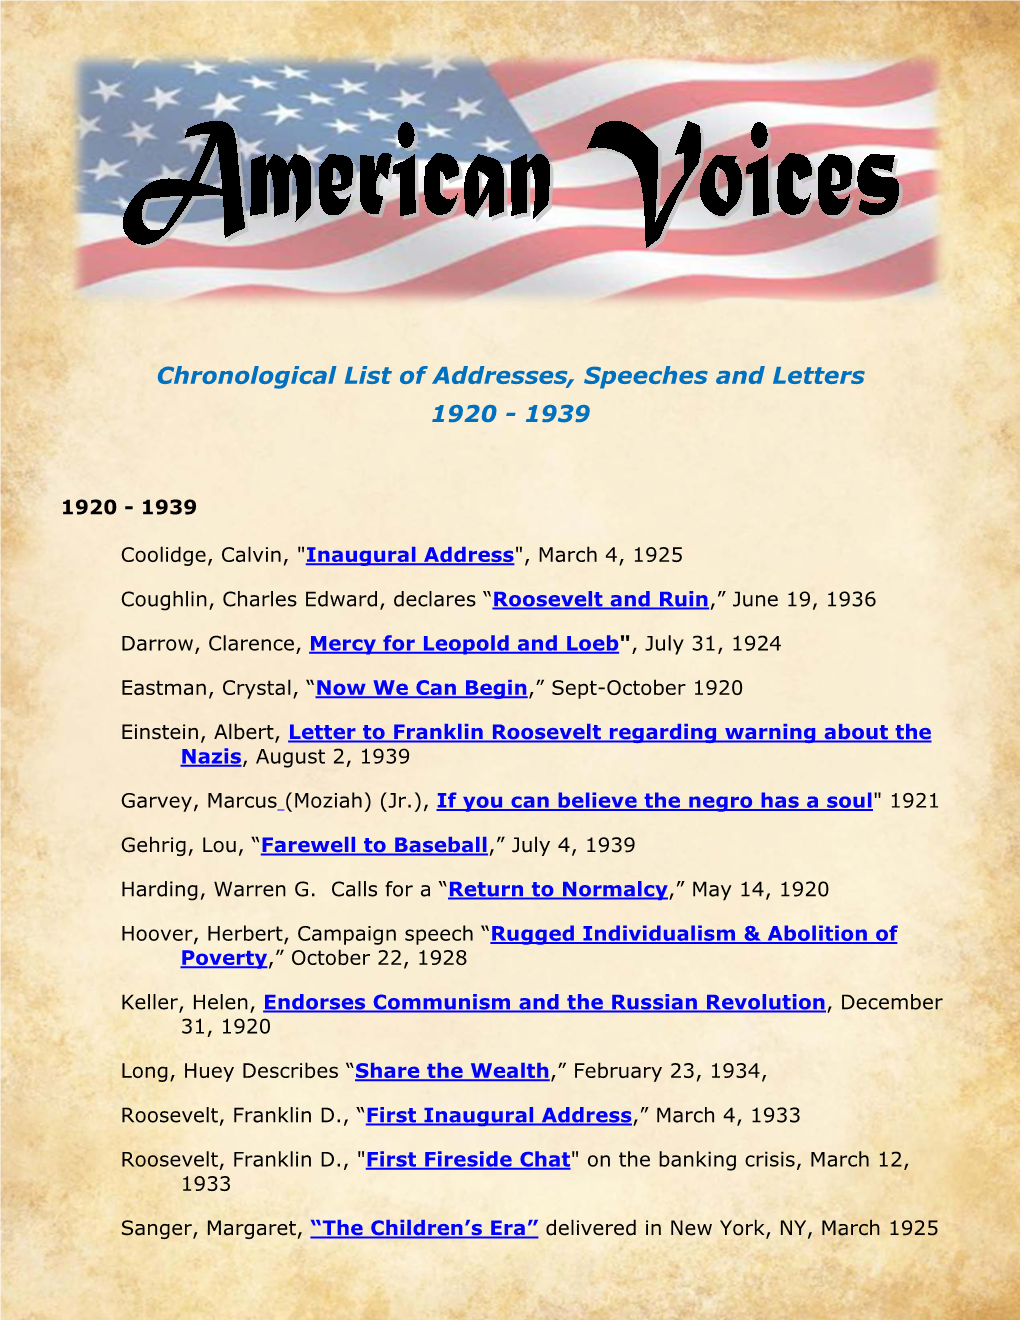 Chronological List of Addresses, Speeches and Letters 1920 - 1939